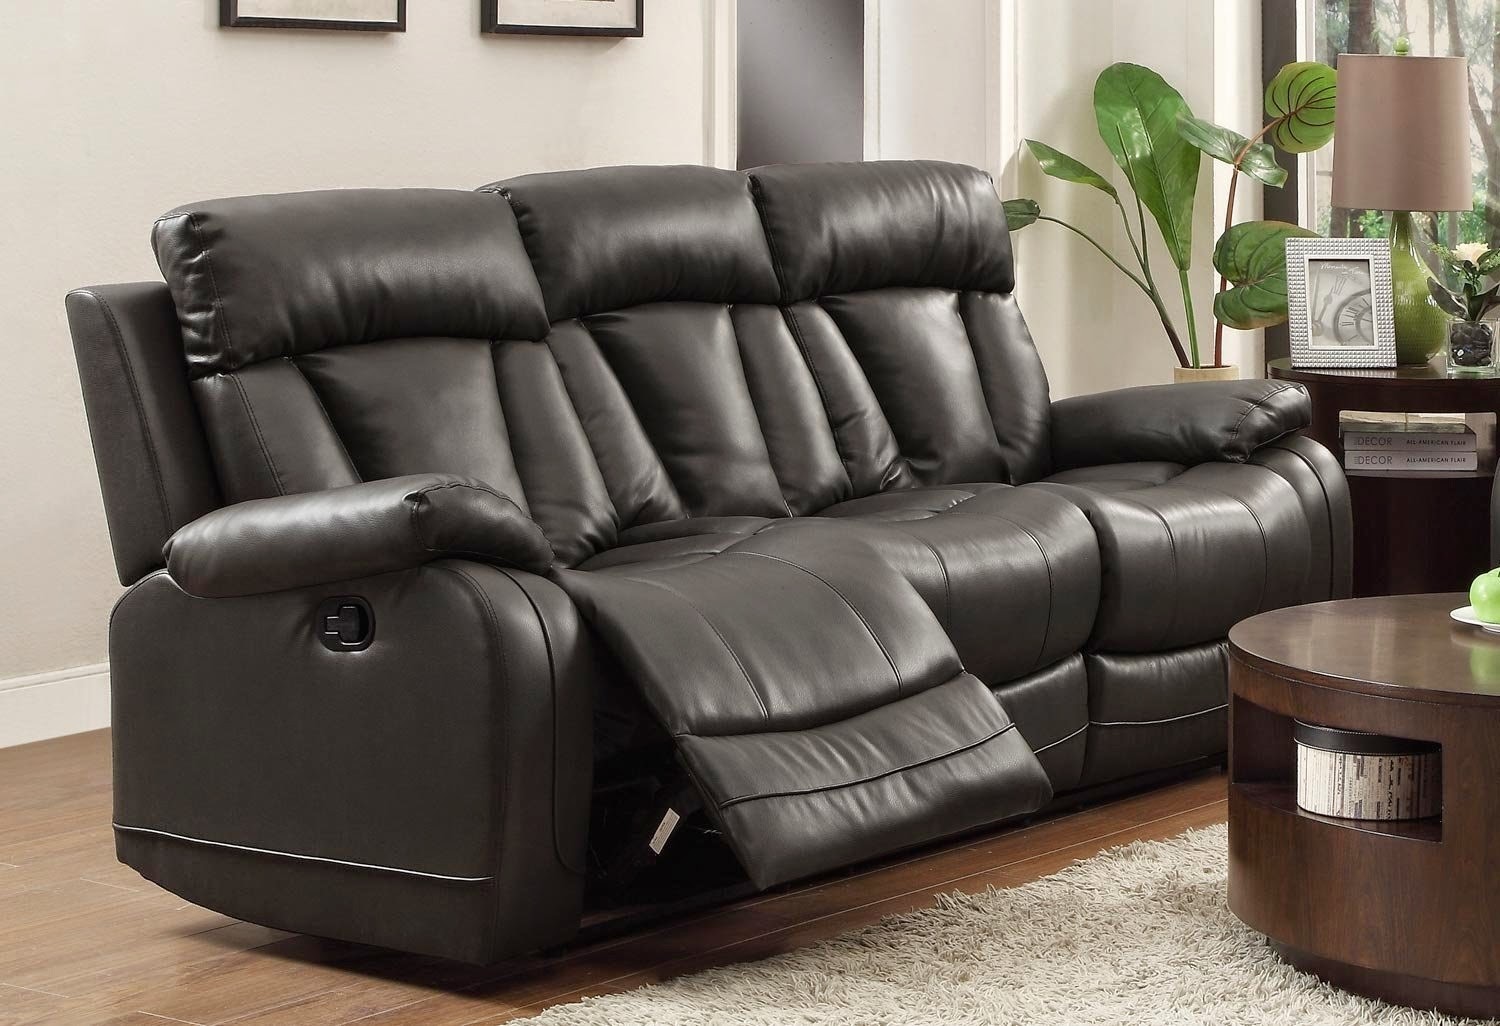 Furniture great looking broyhill recliners for 1